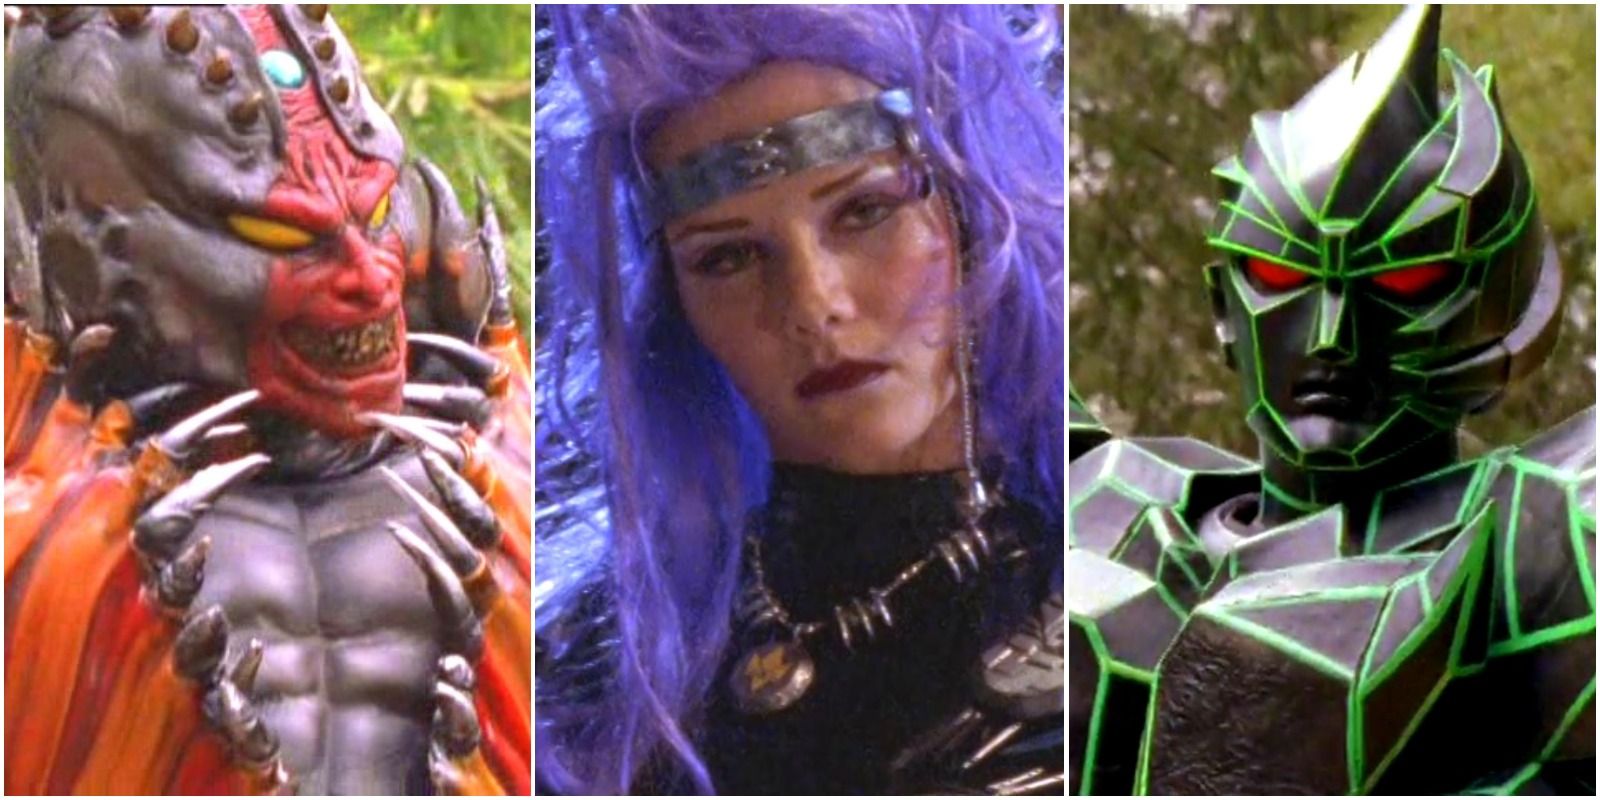 The major villains of Power Rangers in Space, specifically Darkonda, Astronema, and Ecliptor